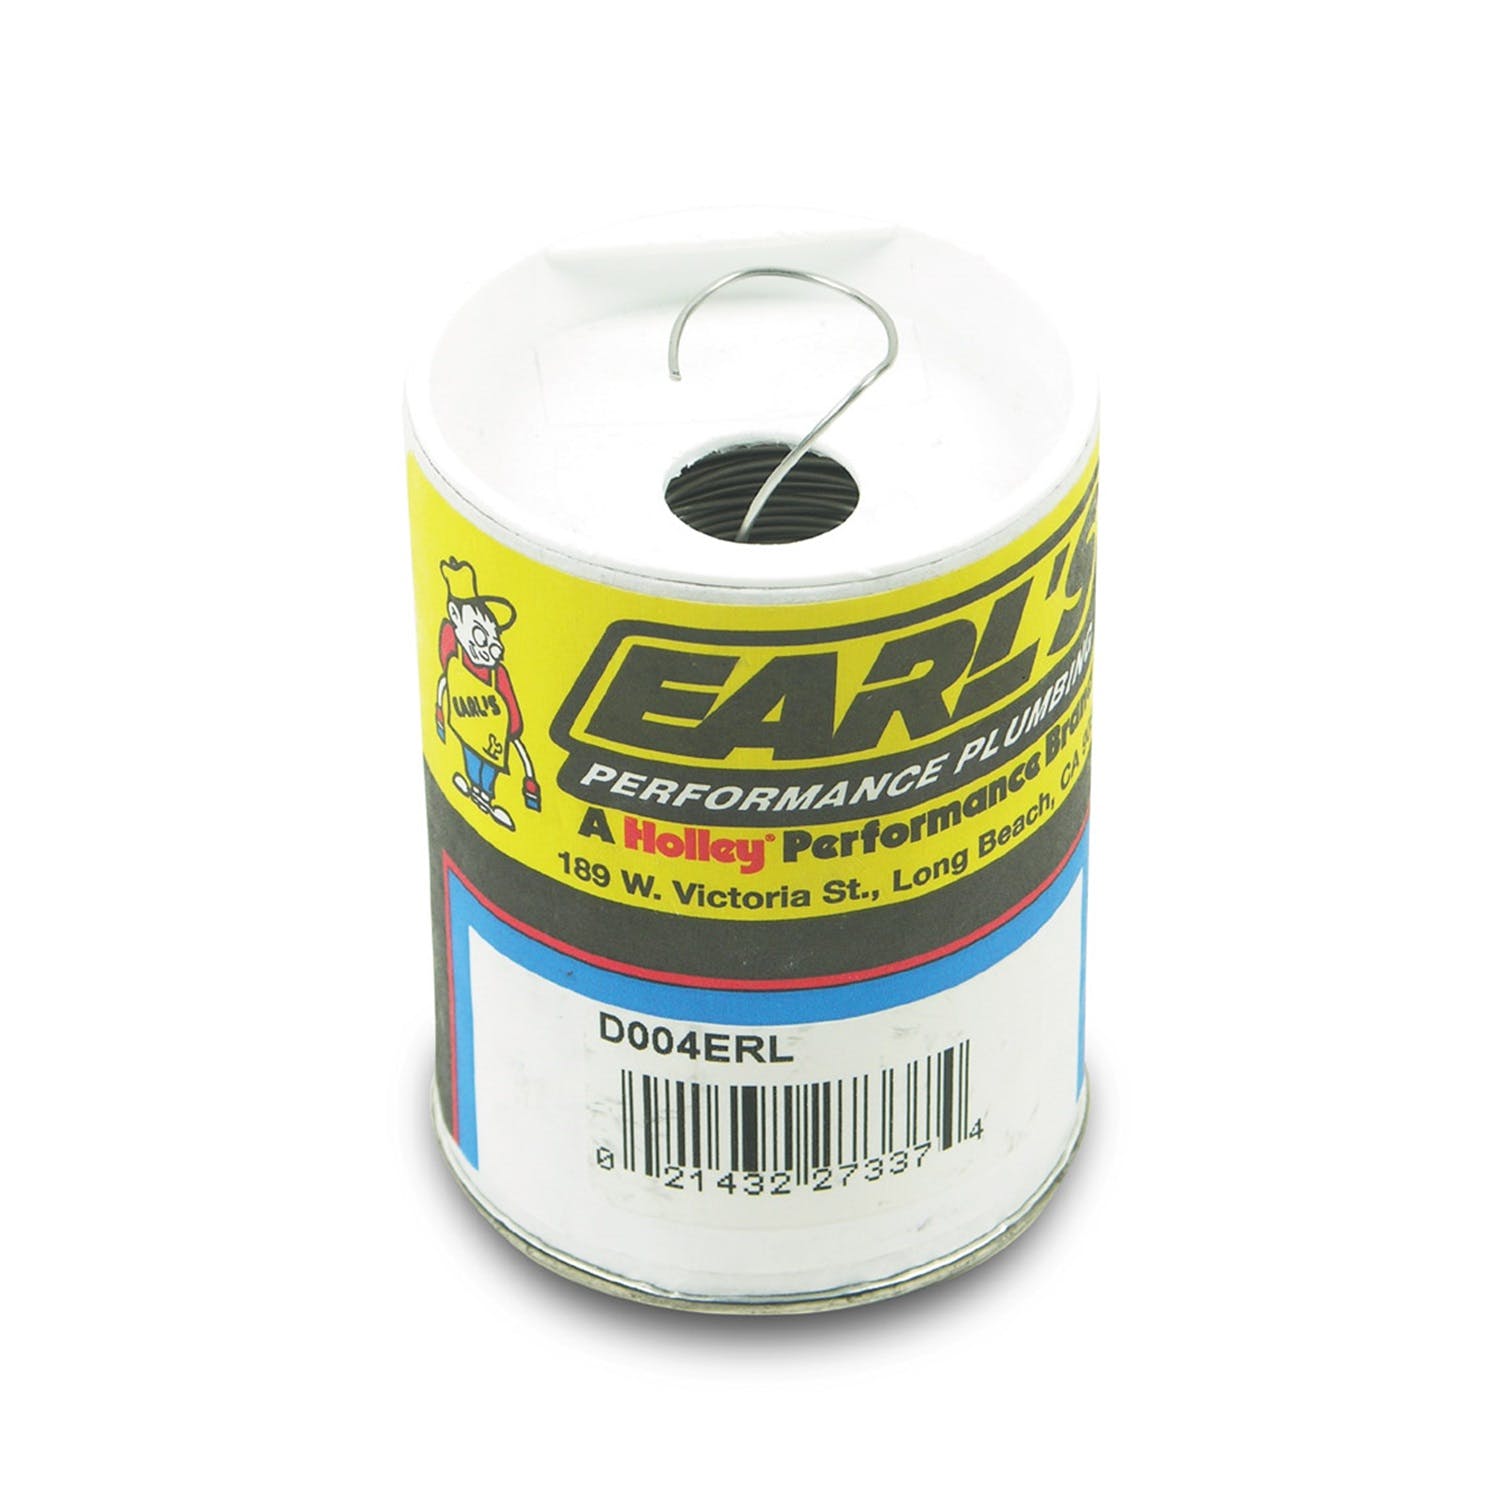 Earl's Performance Plumbing D004ERL .041 Type 302 S.S. Safety Wire